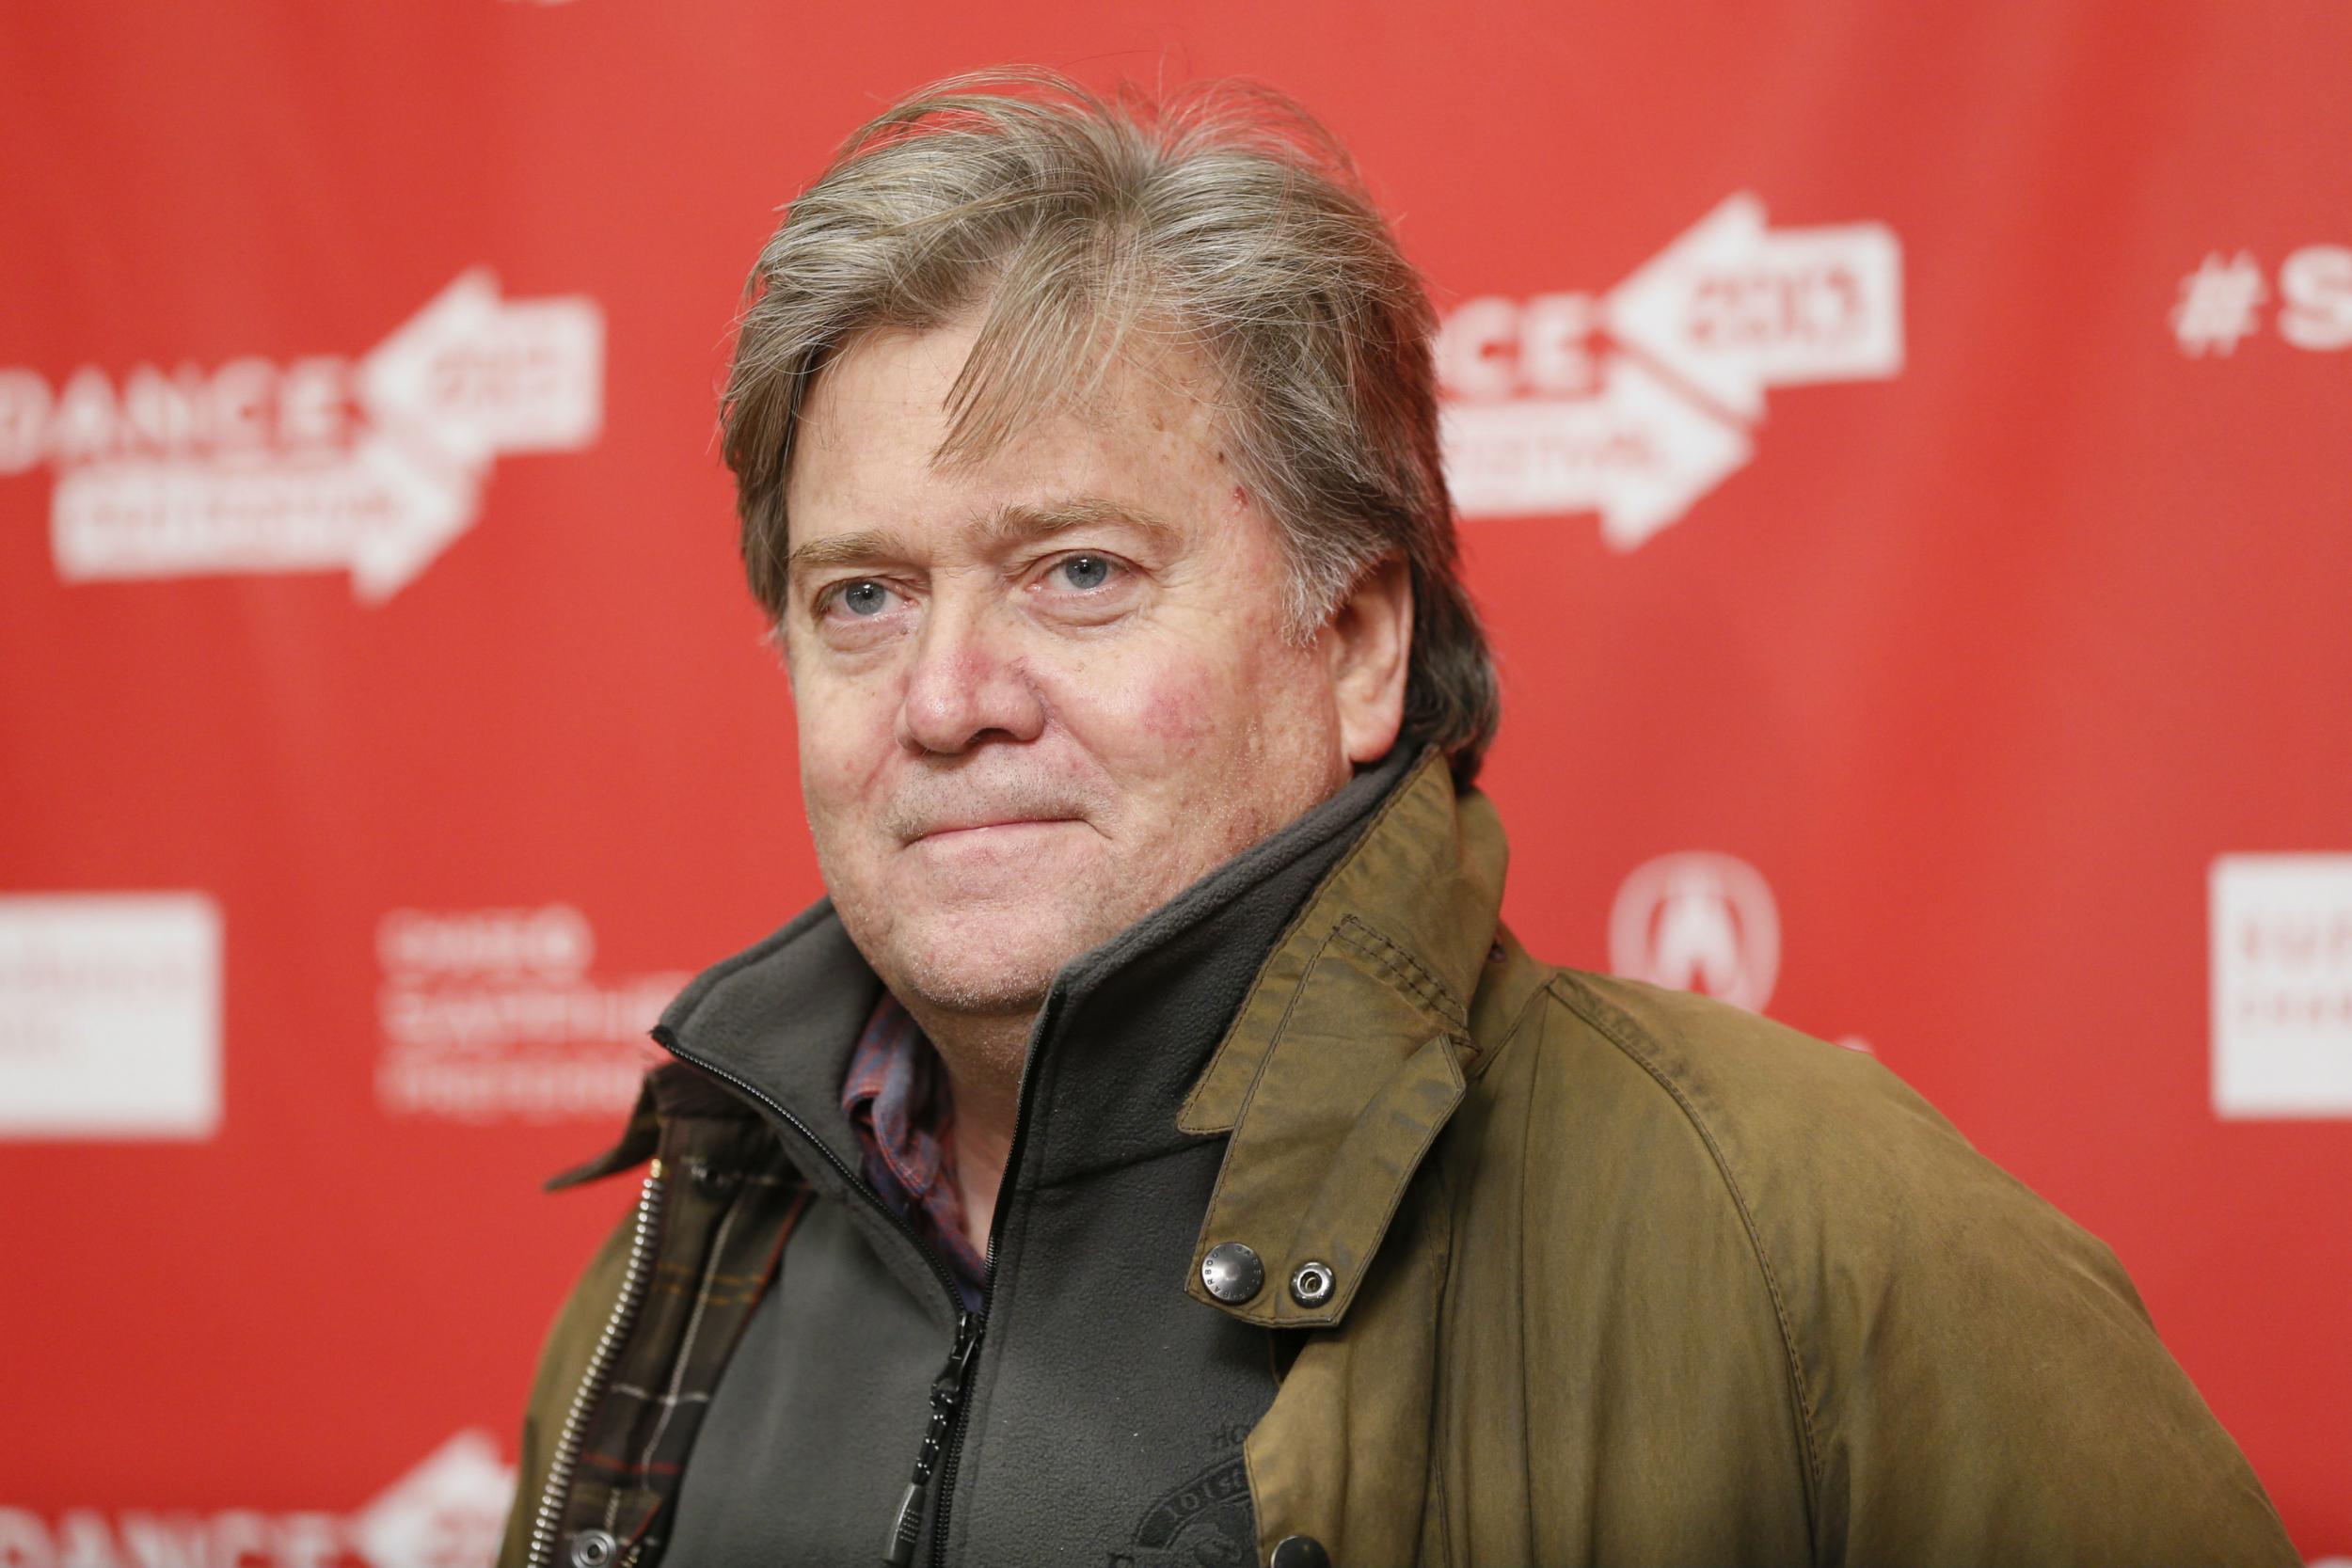 Stephen Bannon joins the Trump campaign as chief executive